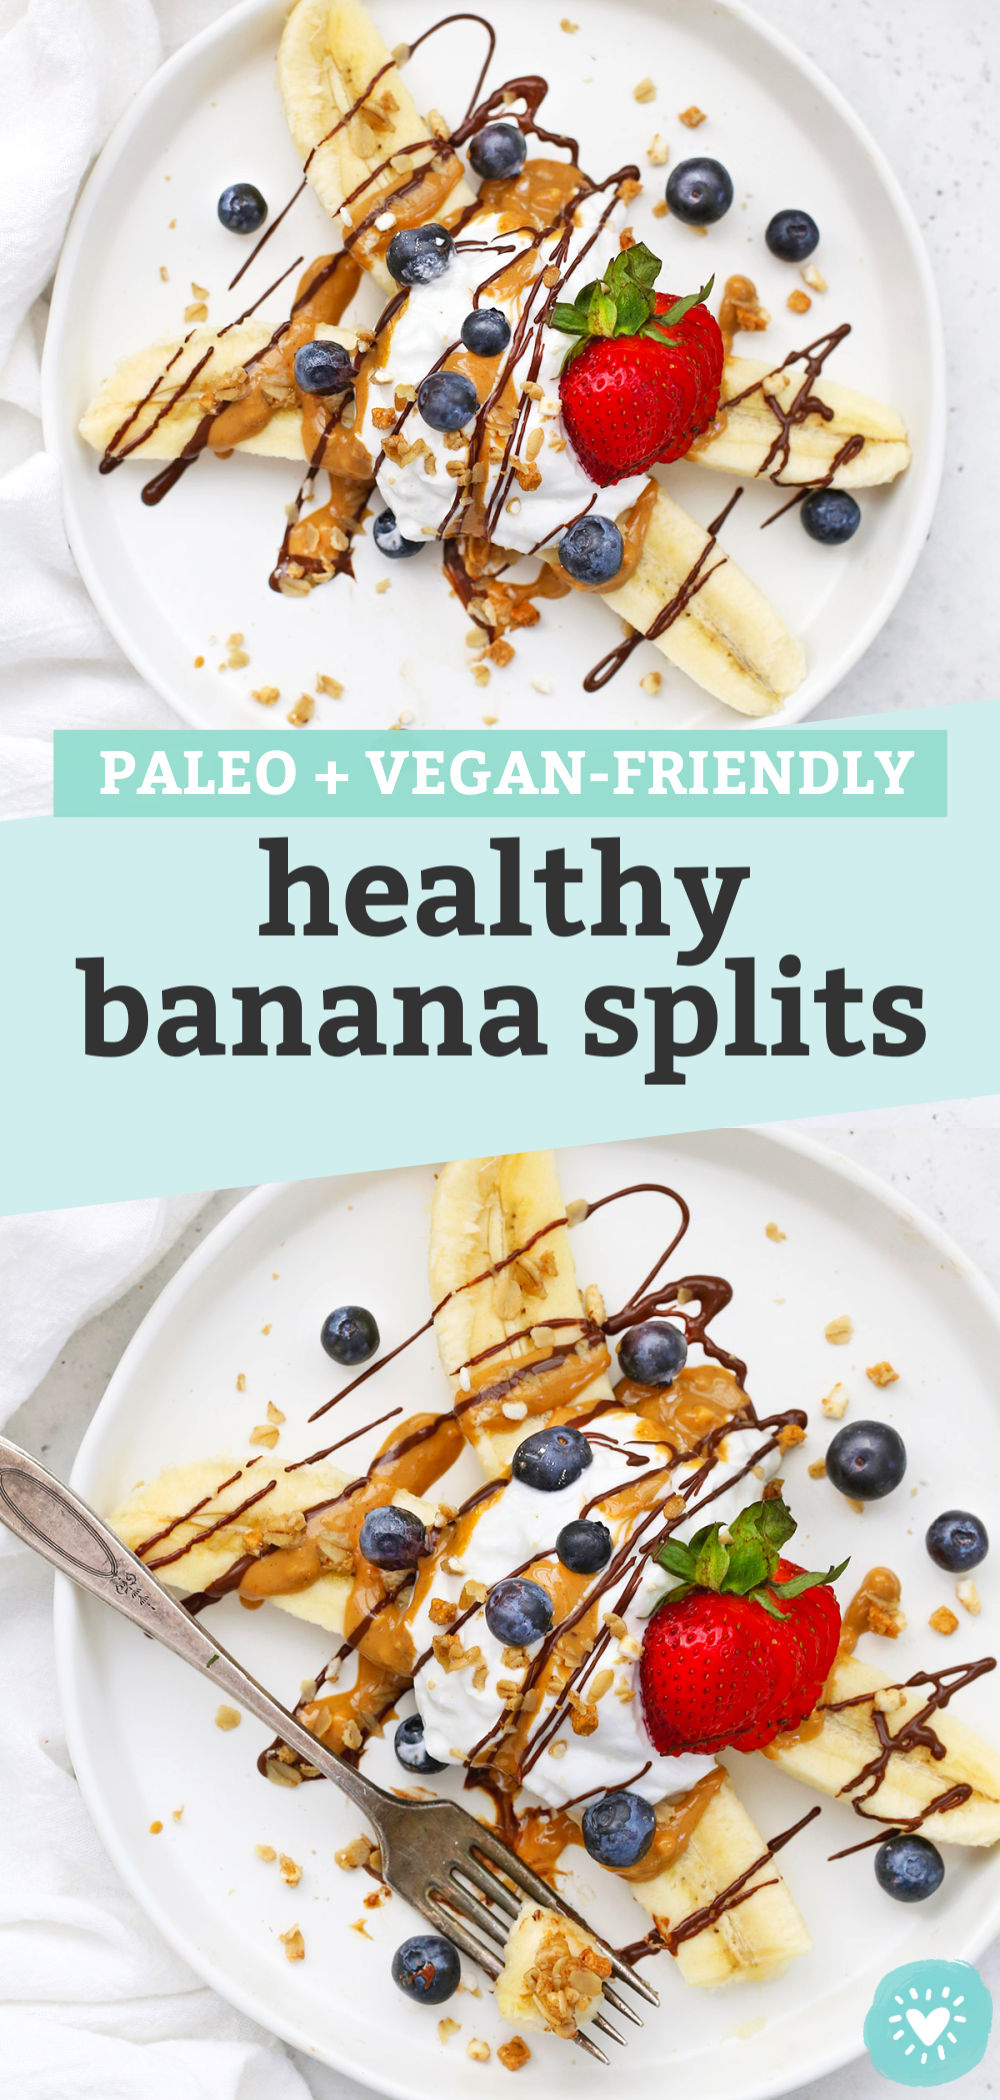 Collage of images of Healthy Banana Split with Yogurt, Peanut Butter, Chocolate, and berries on a white plate with text that reads "Paleo + Vegan-Friendly Healthy Banana Splits"